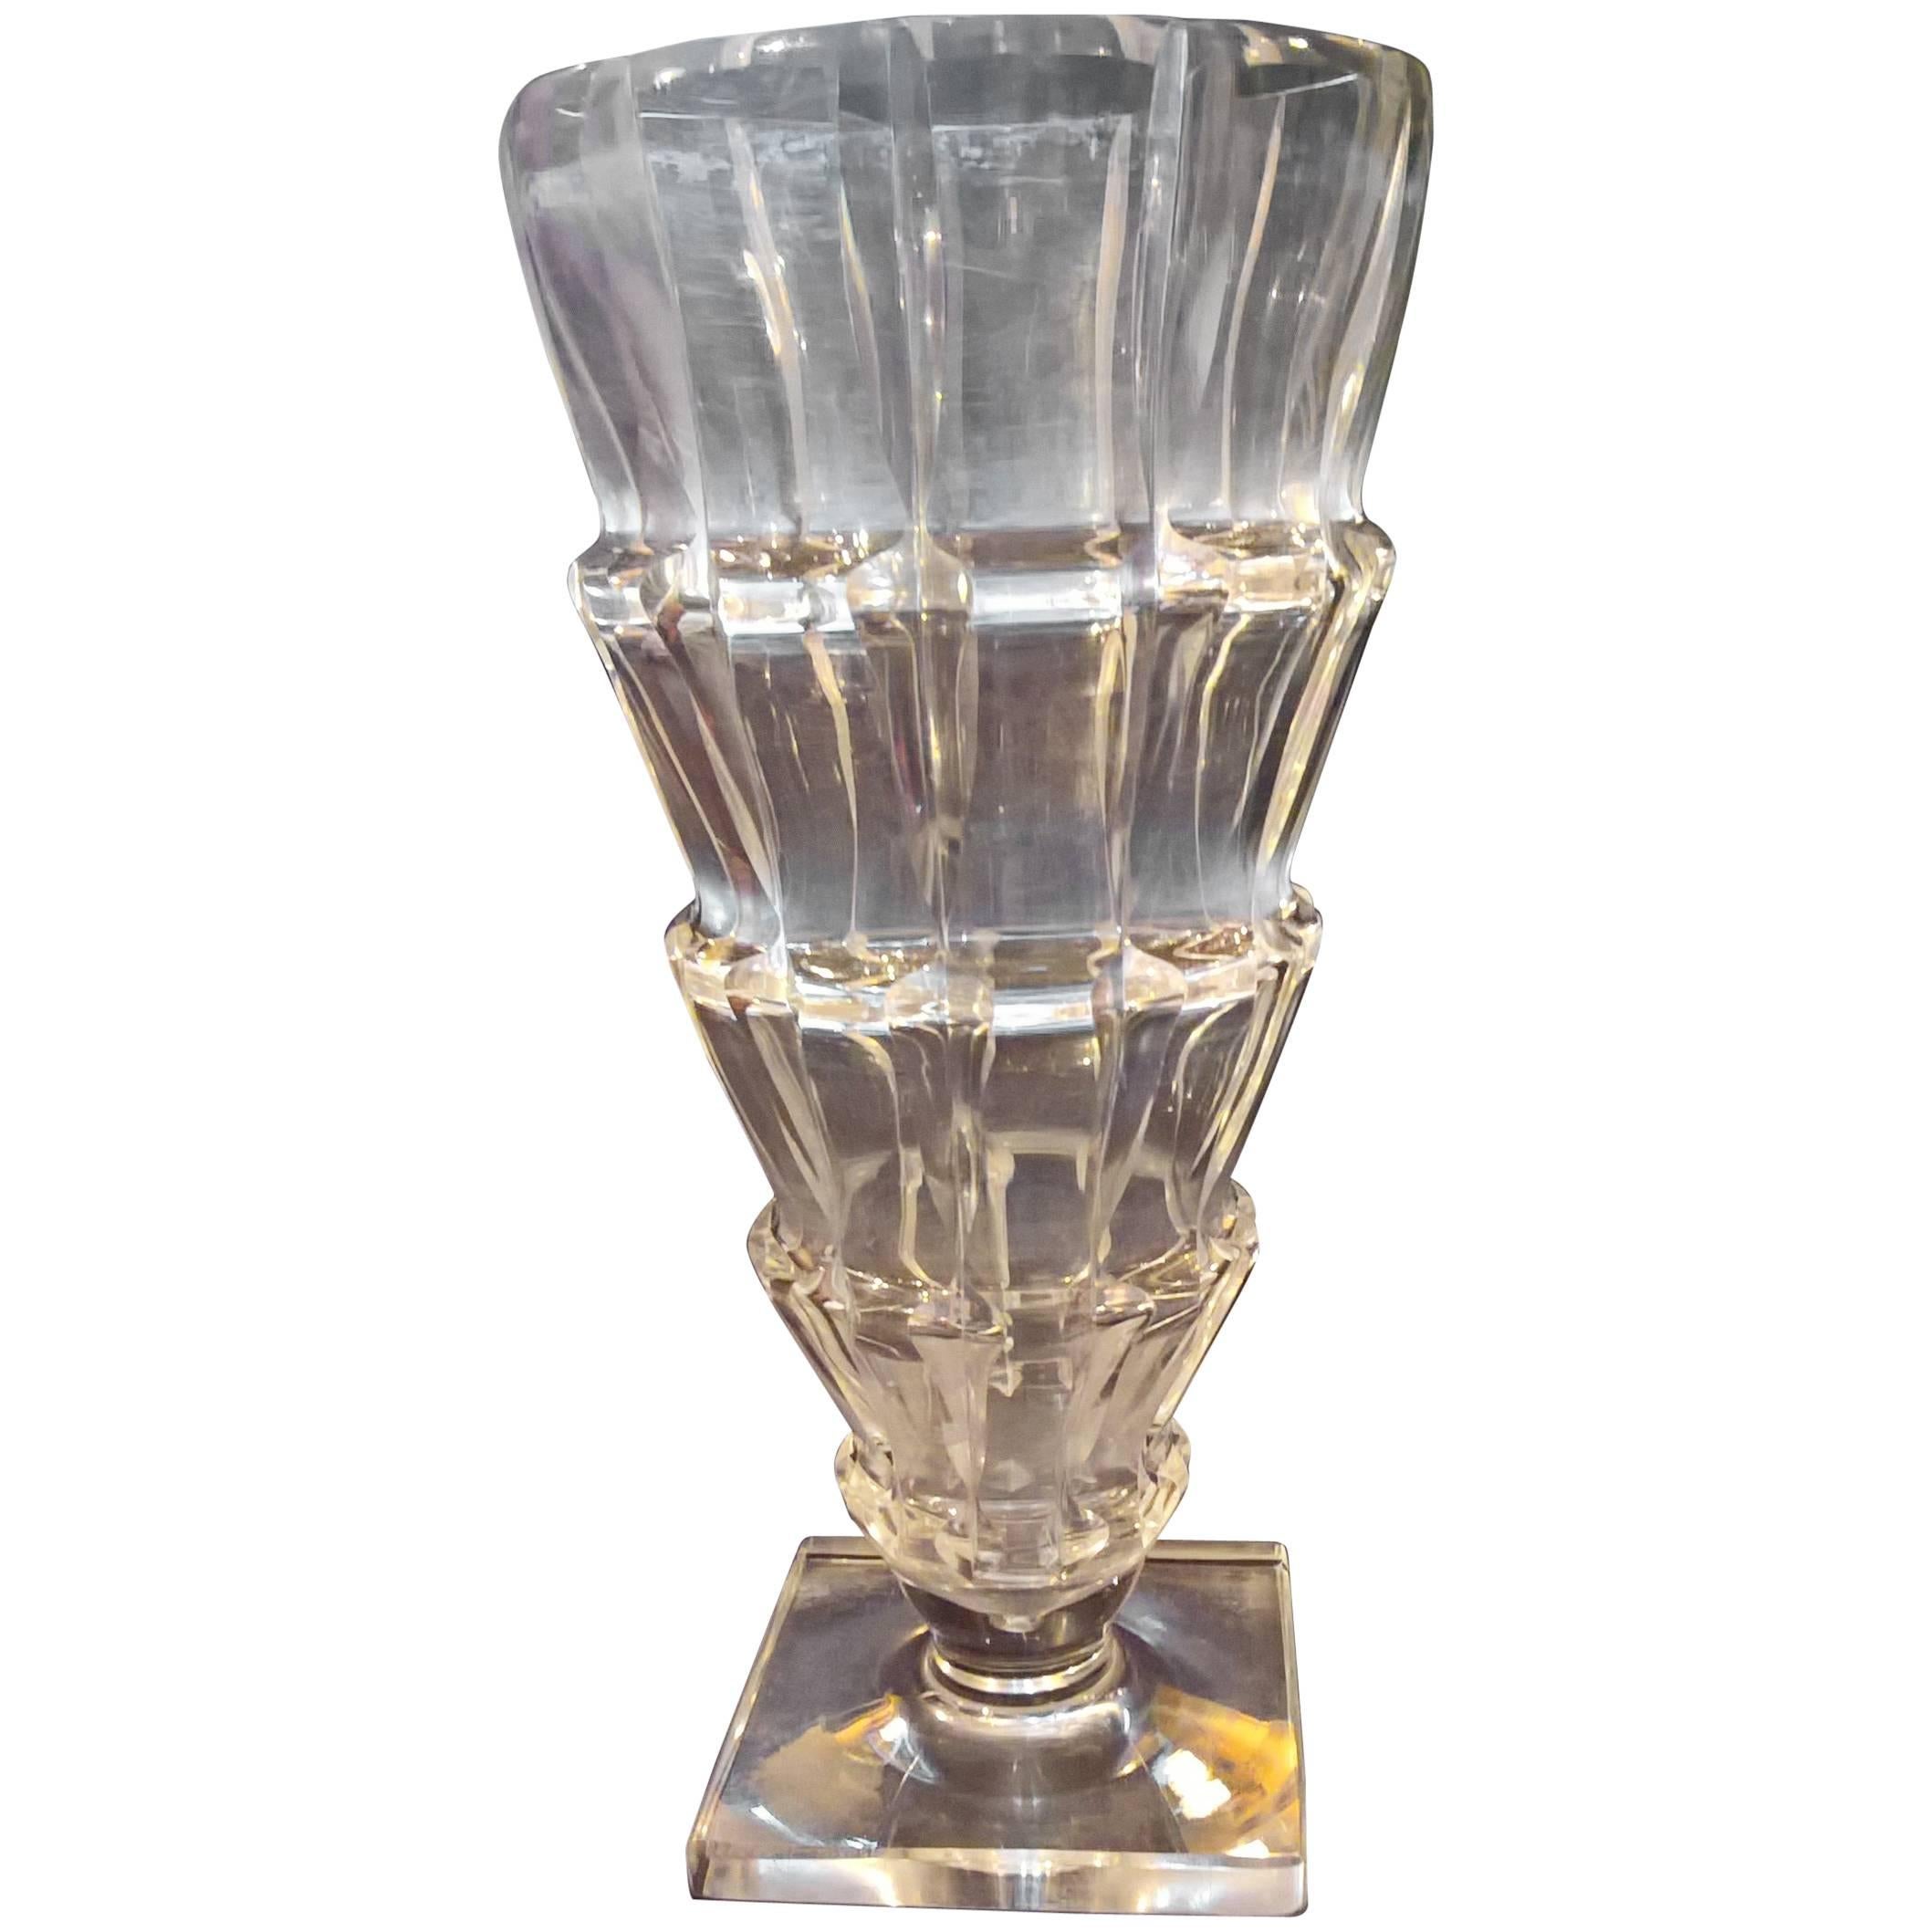 Art Deco French St. Louis Crystal Vase by Sala Jean